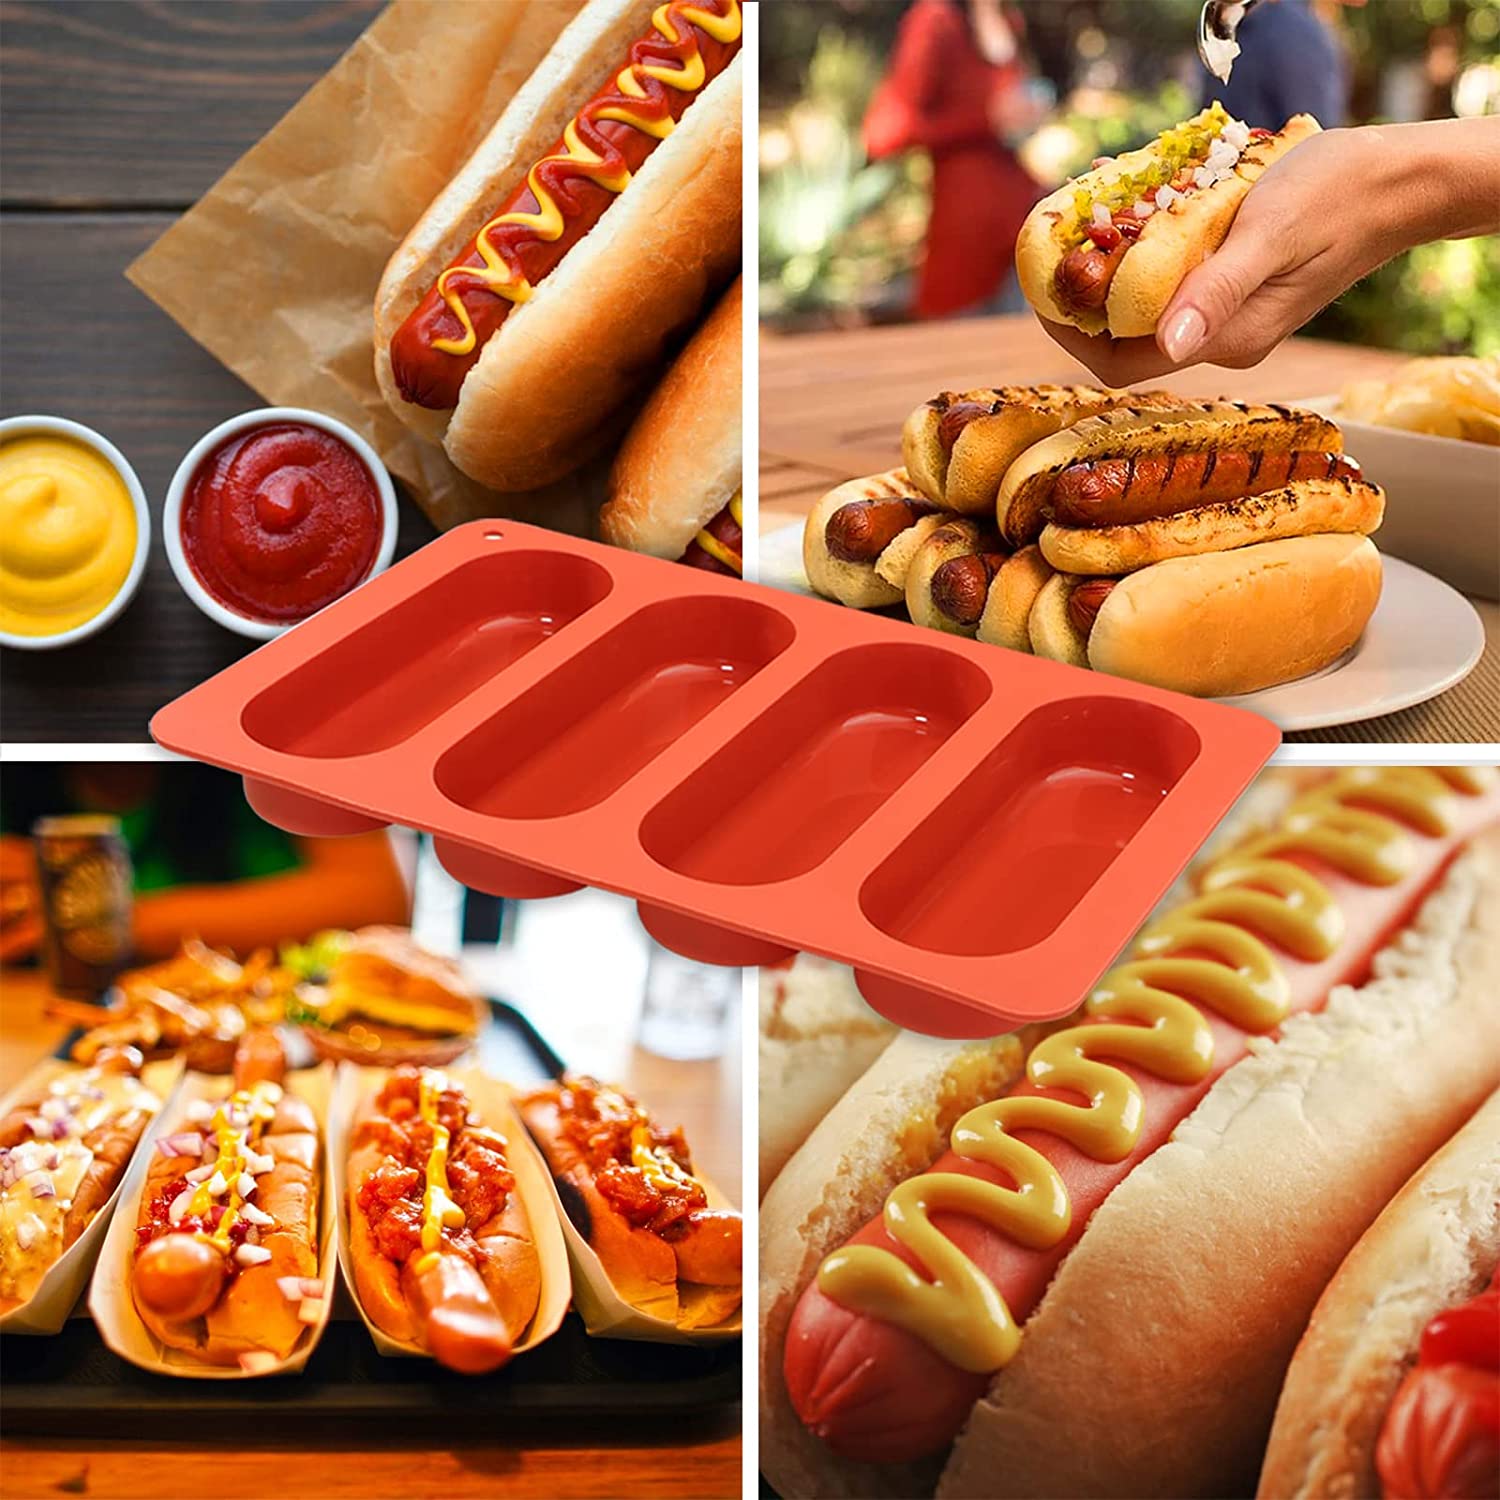 Tohuu Silicone Food Molds Food Storage Container Mold for DIY Breakfast  Sausage Hot Dogs Non-Stick Silicone Mold for Homemade Hotdog Buns Food  normal 